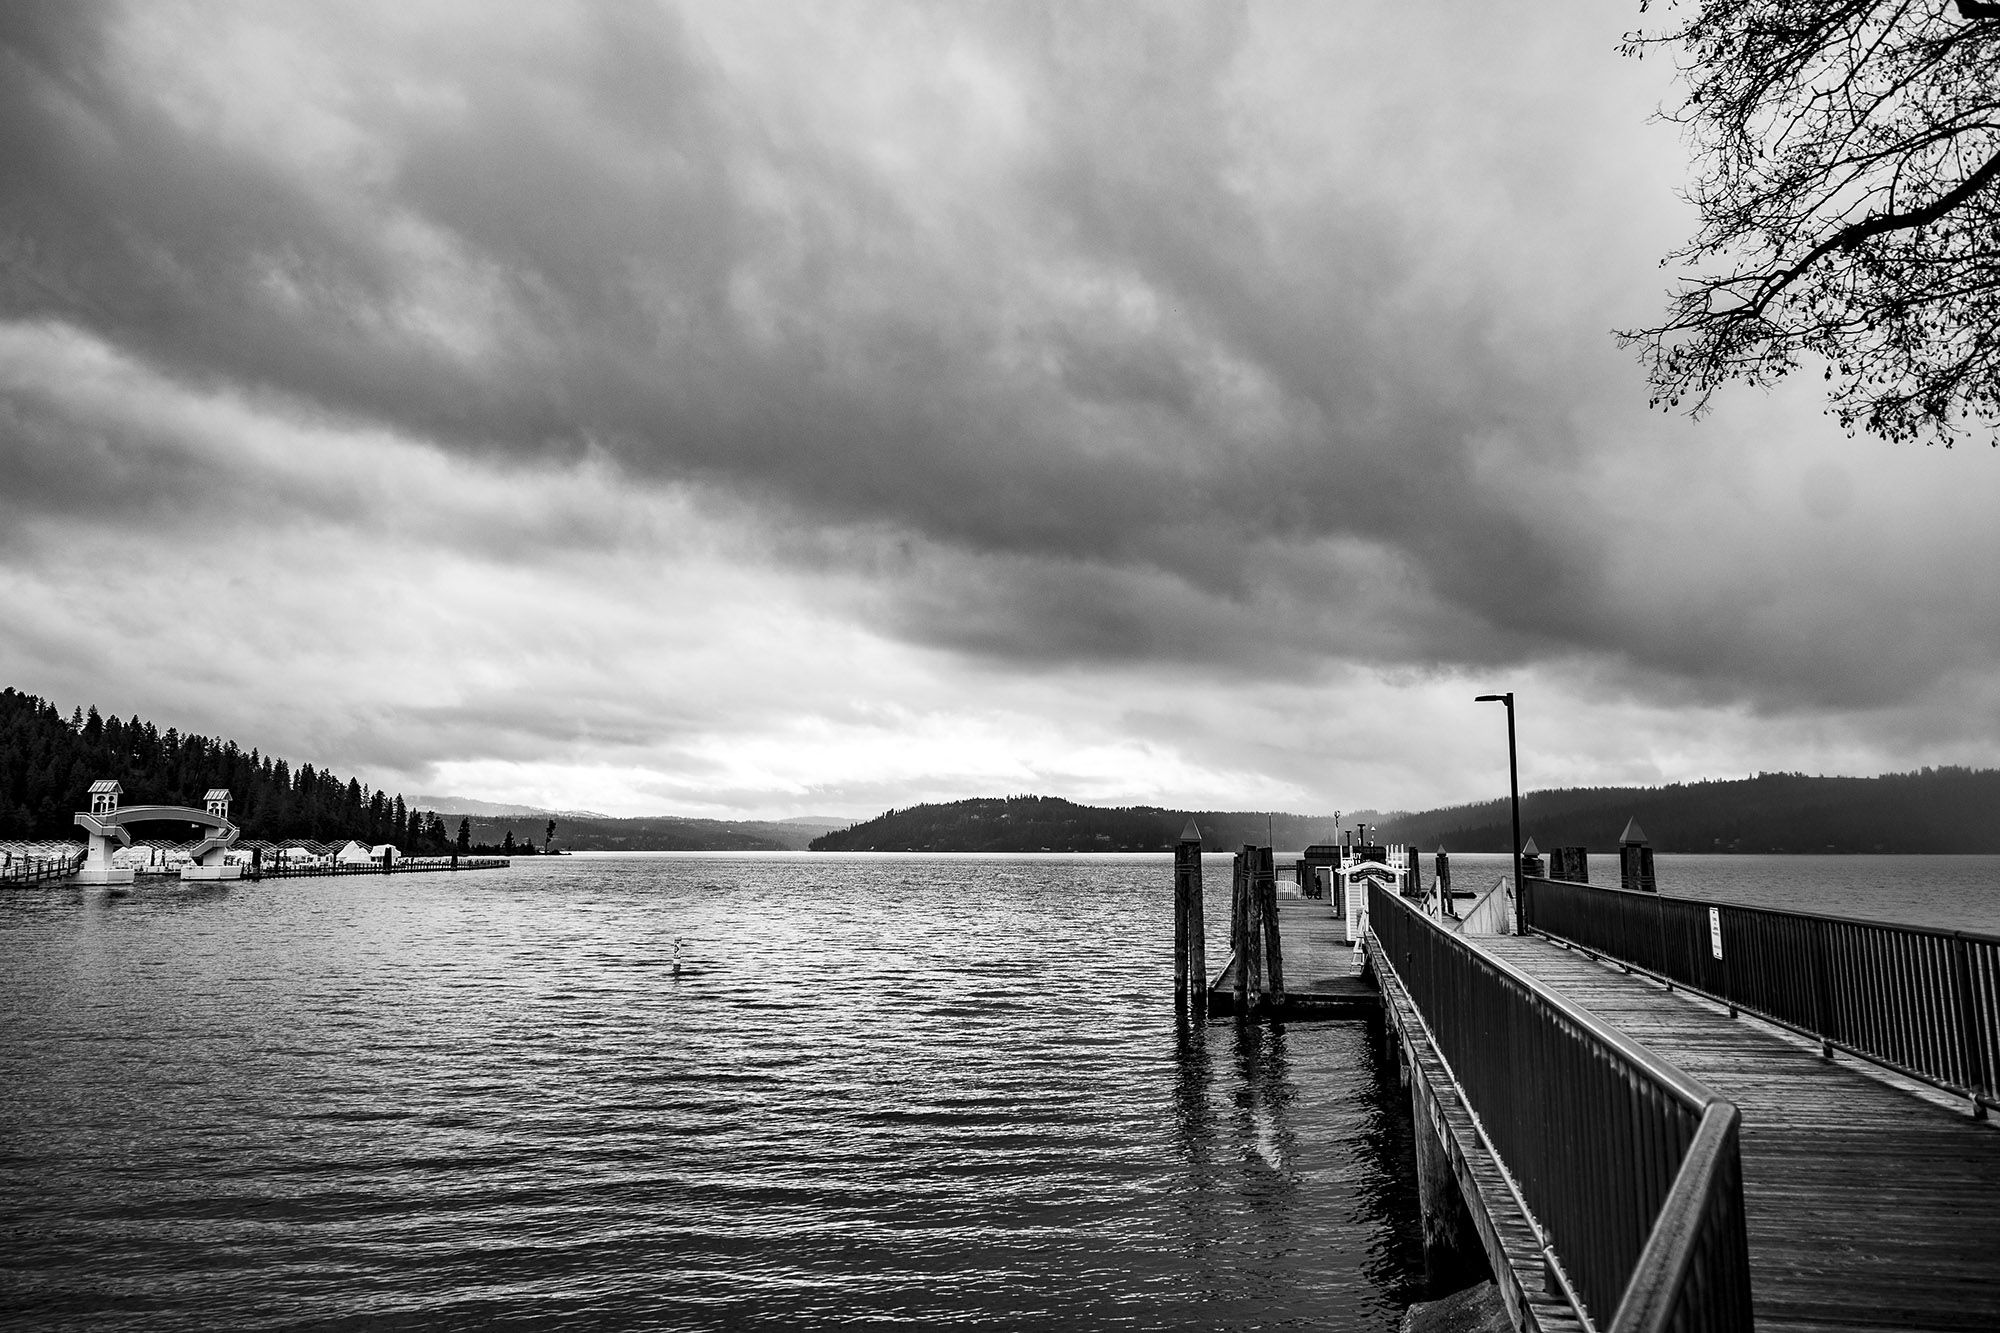 Coeur d'Alene, looking out at the lake ©2022